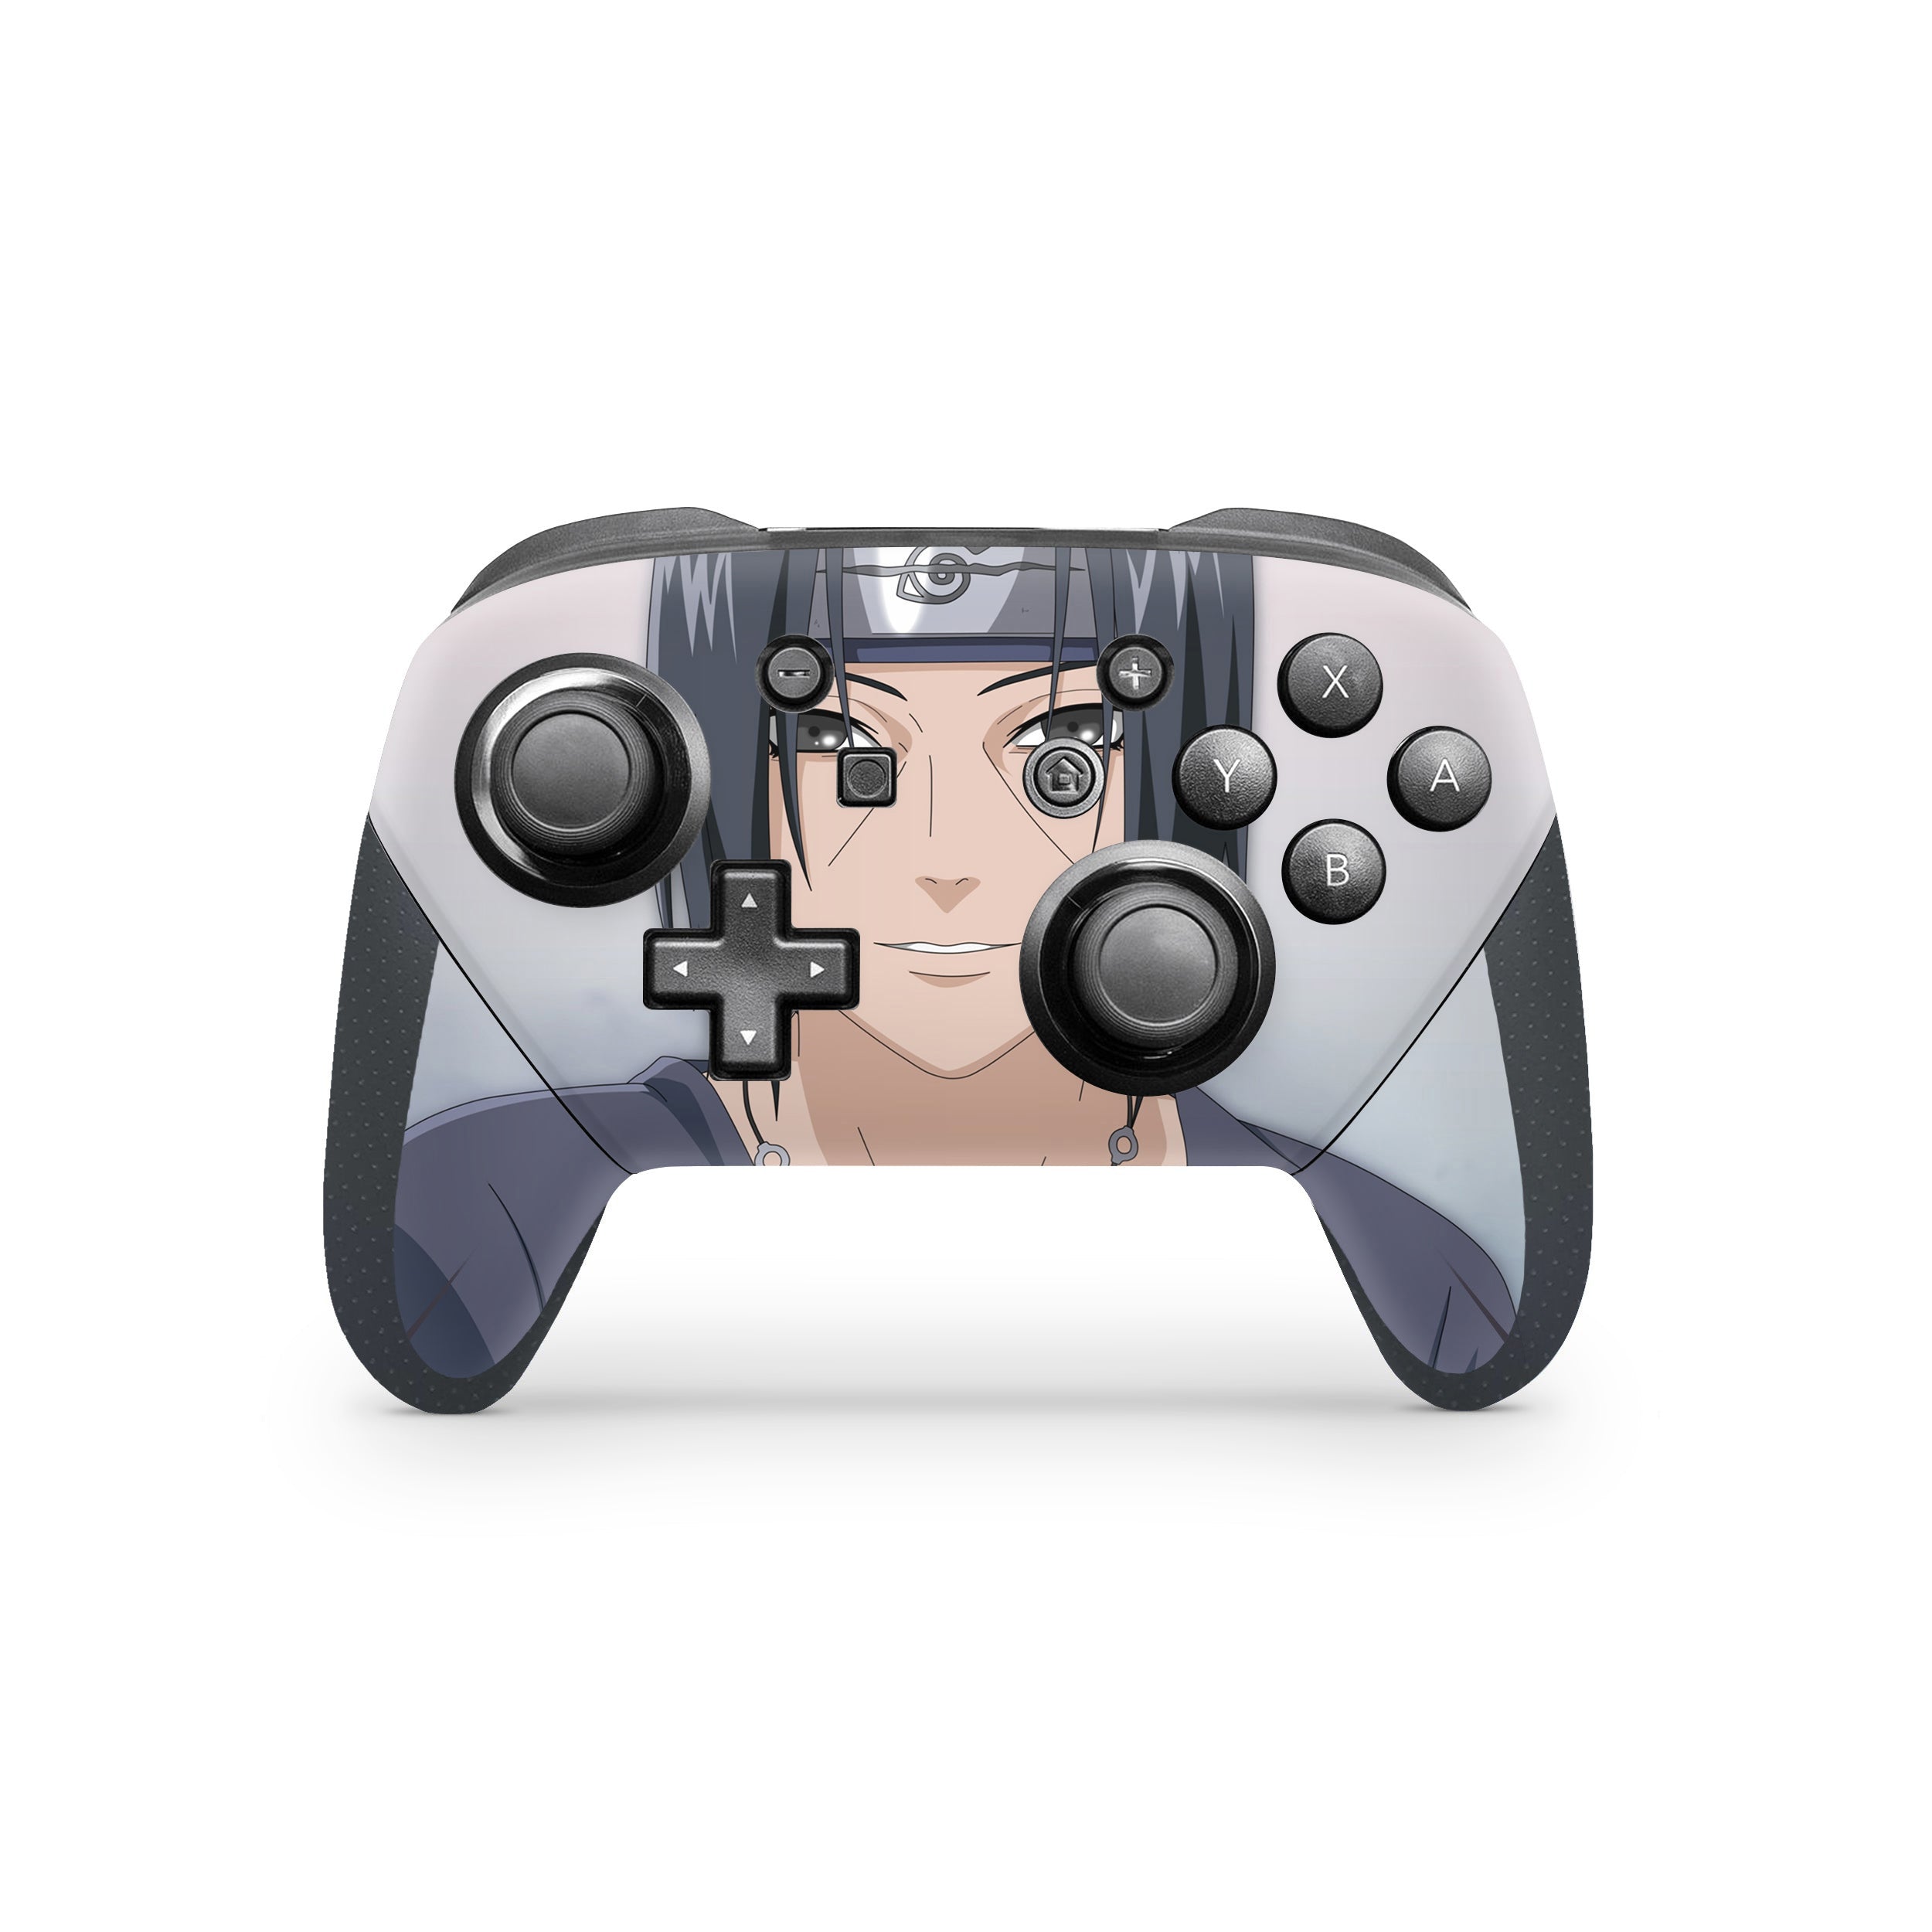 A video game skin featuring a Naruto Itachi design for the Switch Pro Controller.